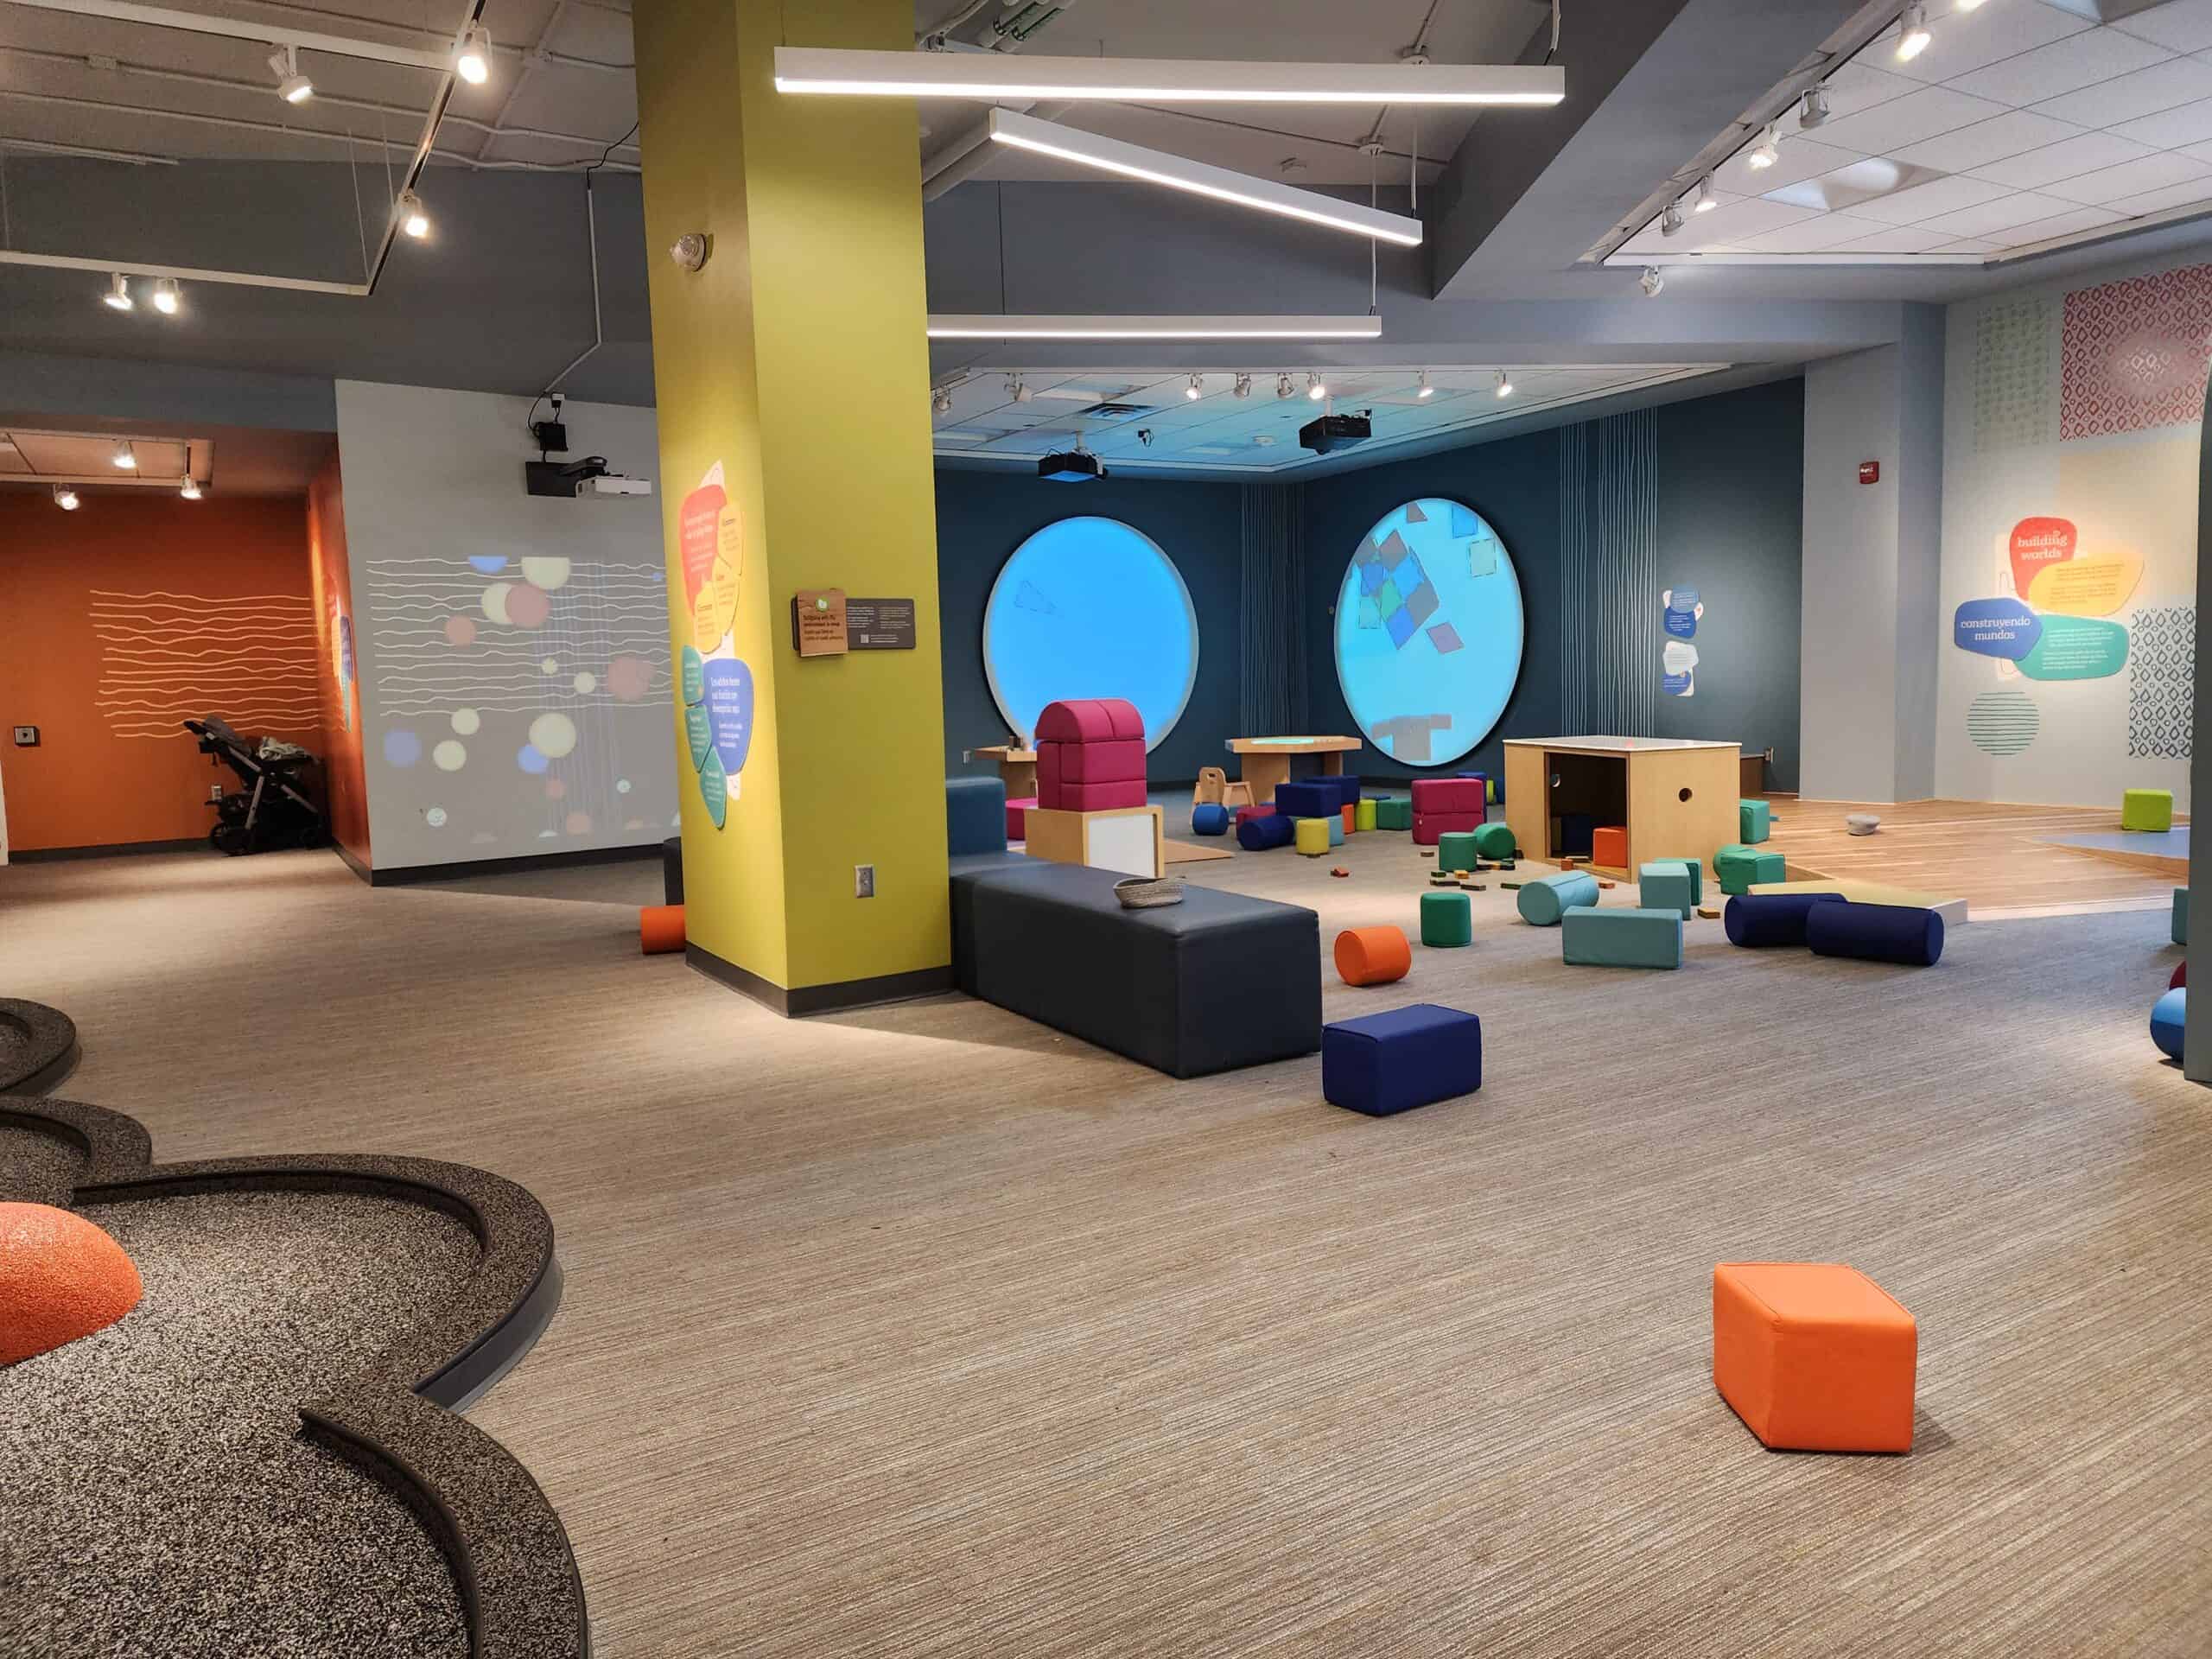 Spacious and modern children's playroom with colorful foam blocks scattered across the floor, large circular windows, and educational wall graphics, providing a bright and inviting space for interactive learning and play.